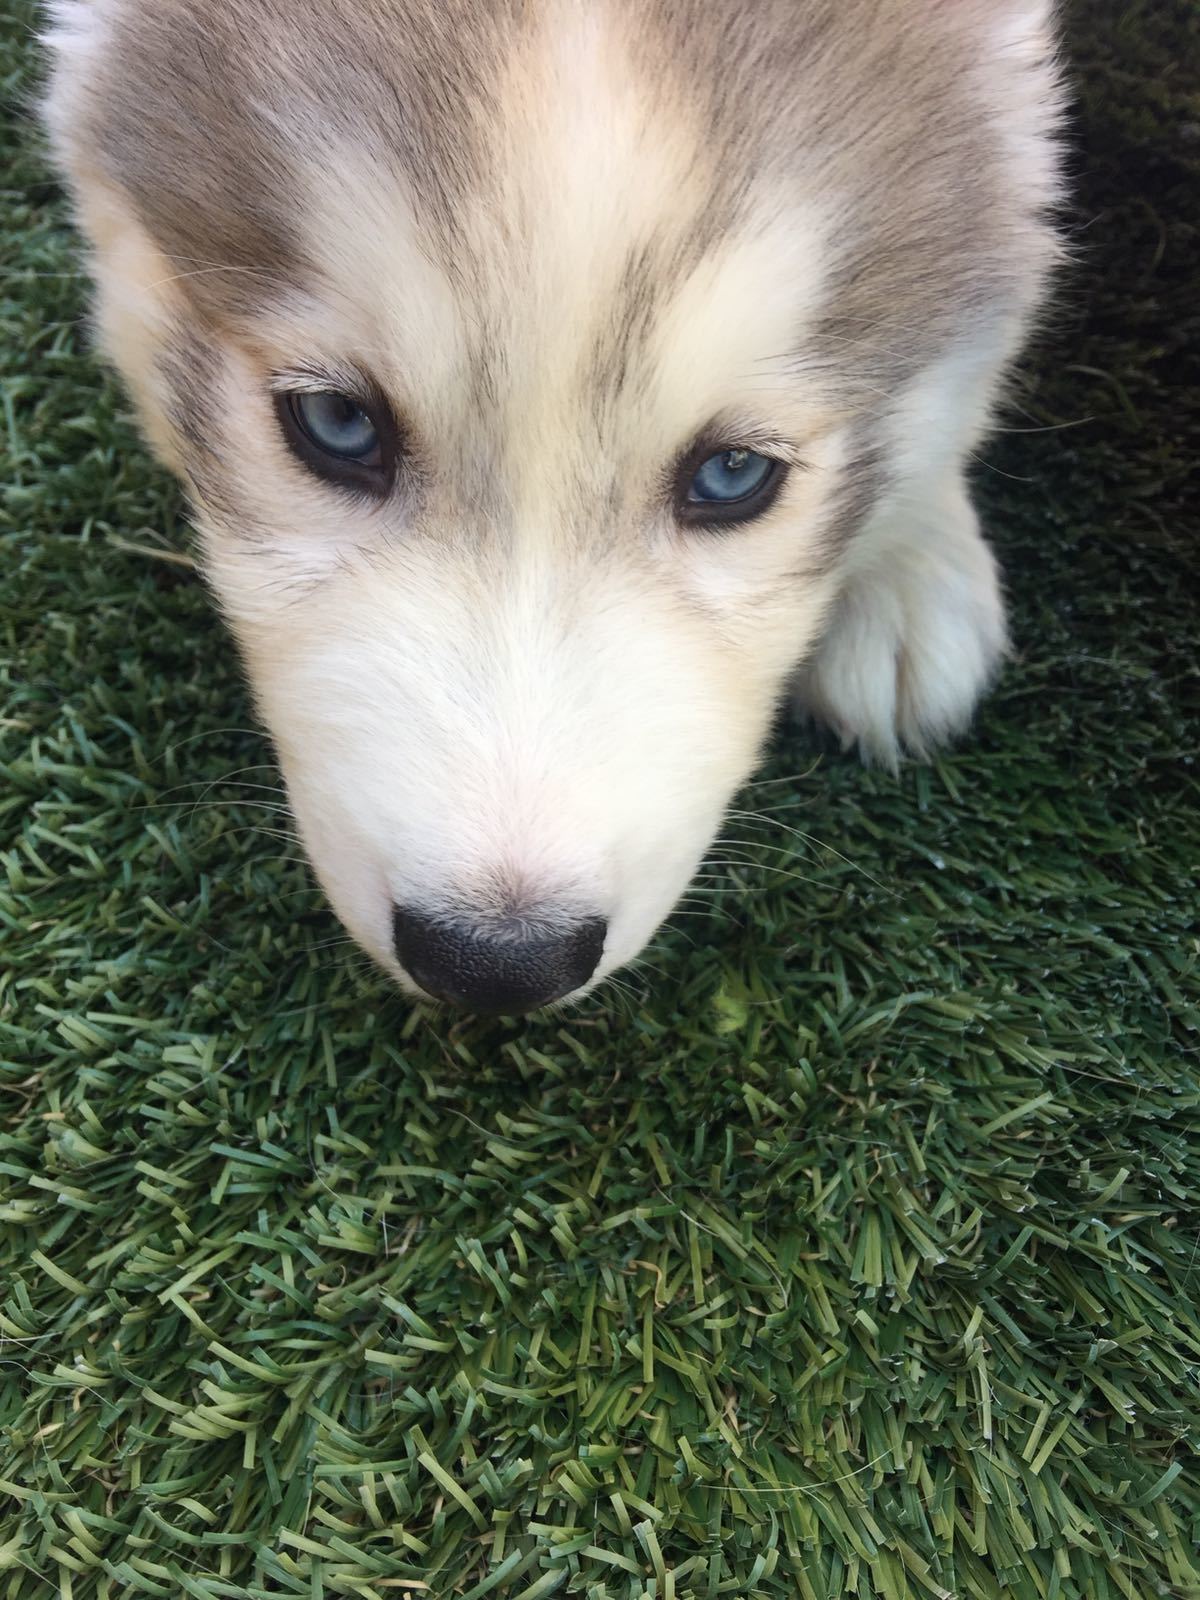 Husky puppy searching for food